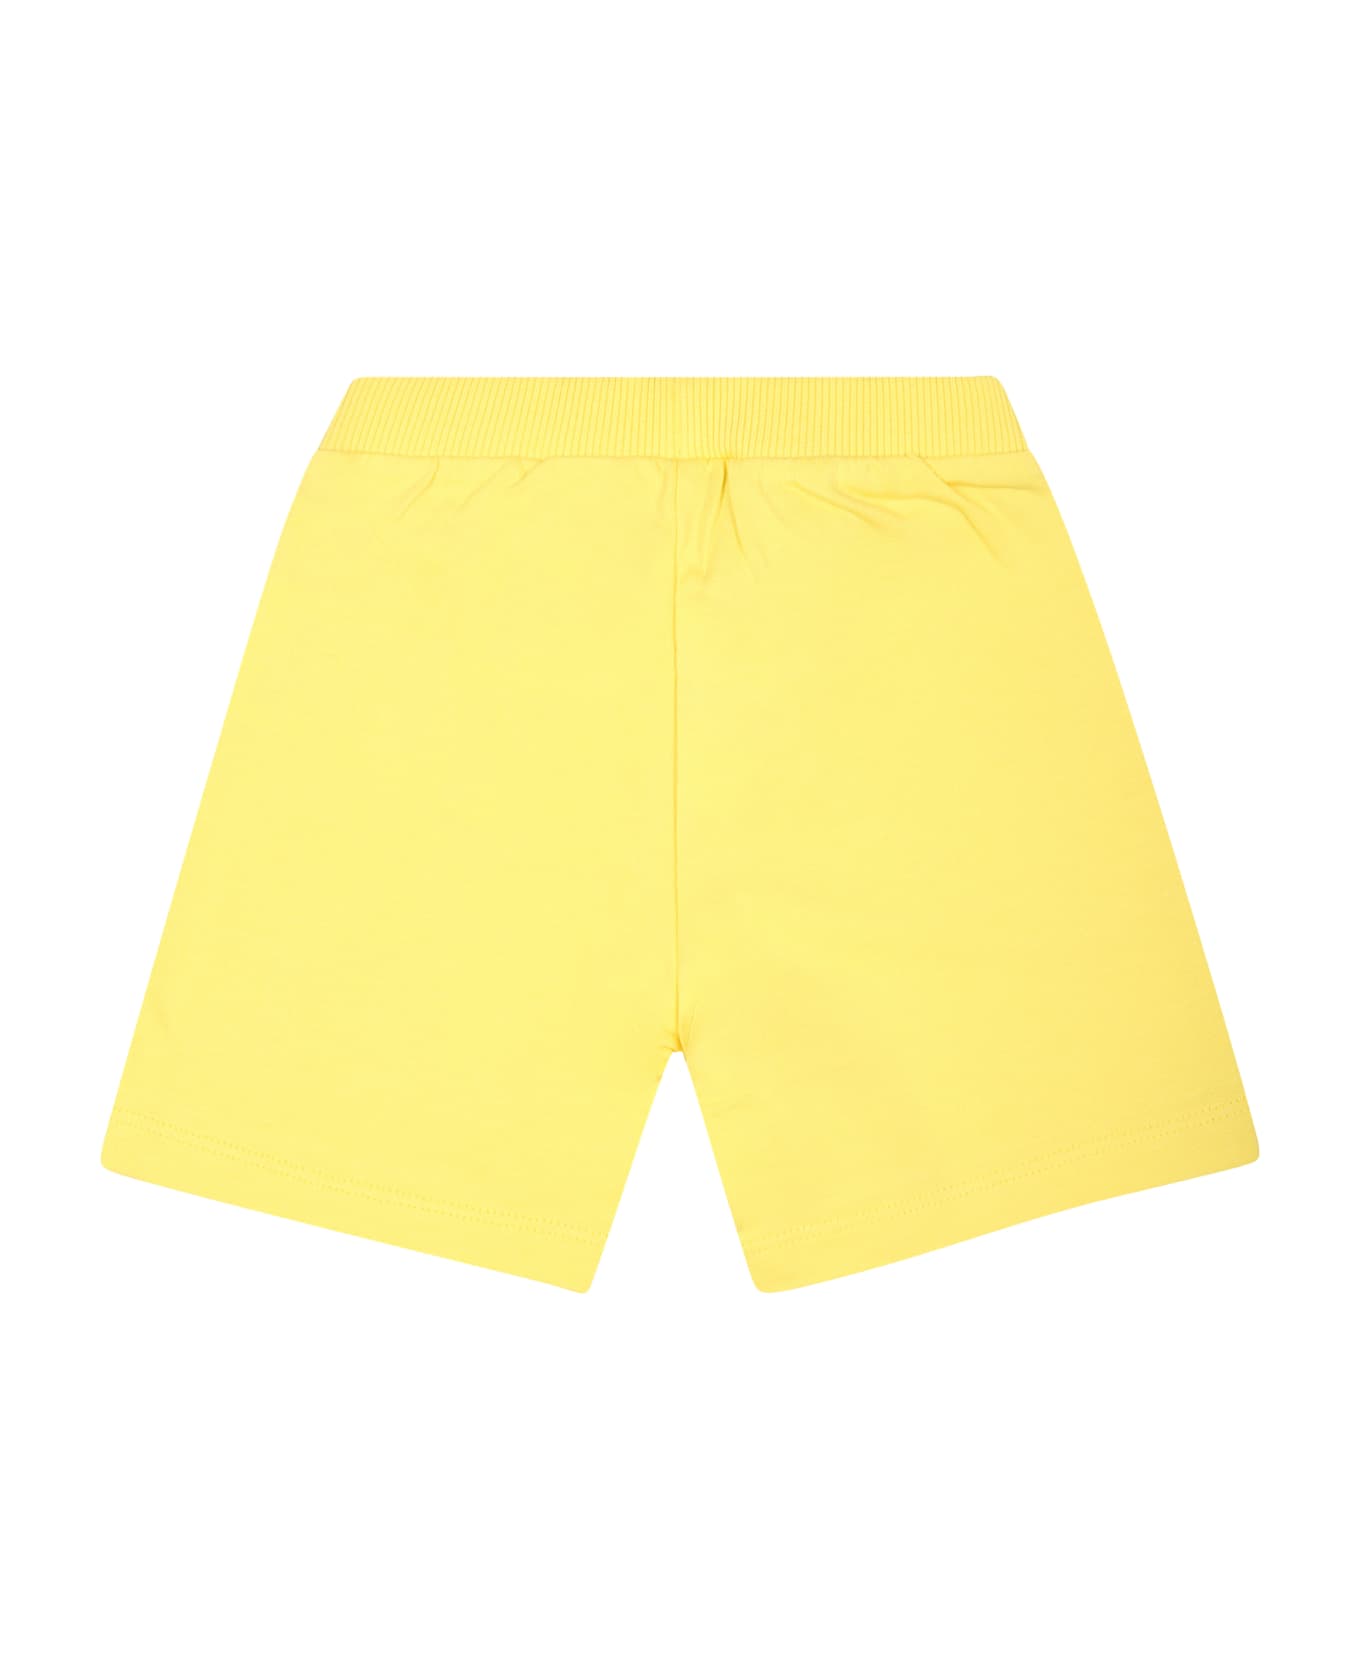 Moschino Yellow Shorts For Baby Boy With Teddy Bears And Logo - Yellow